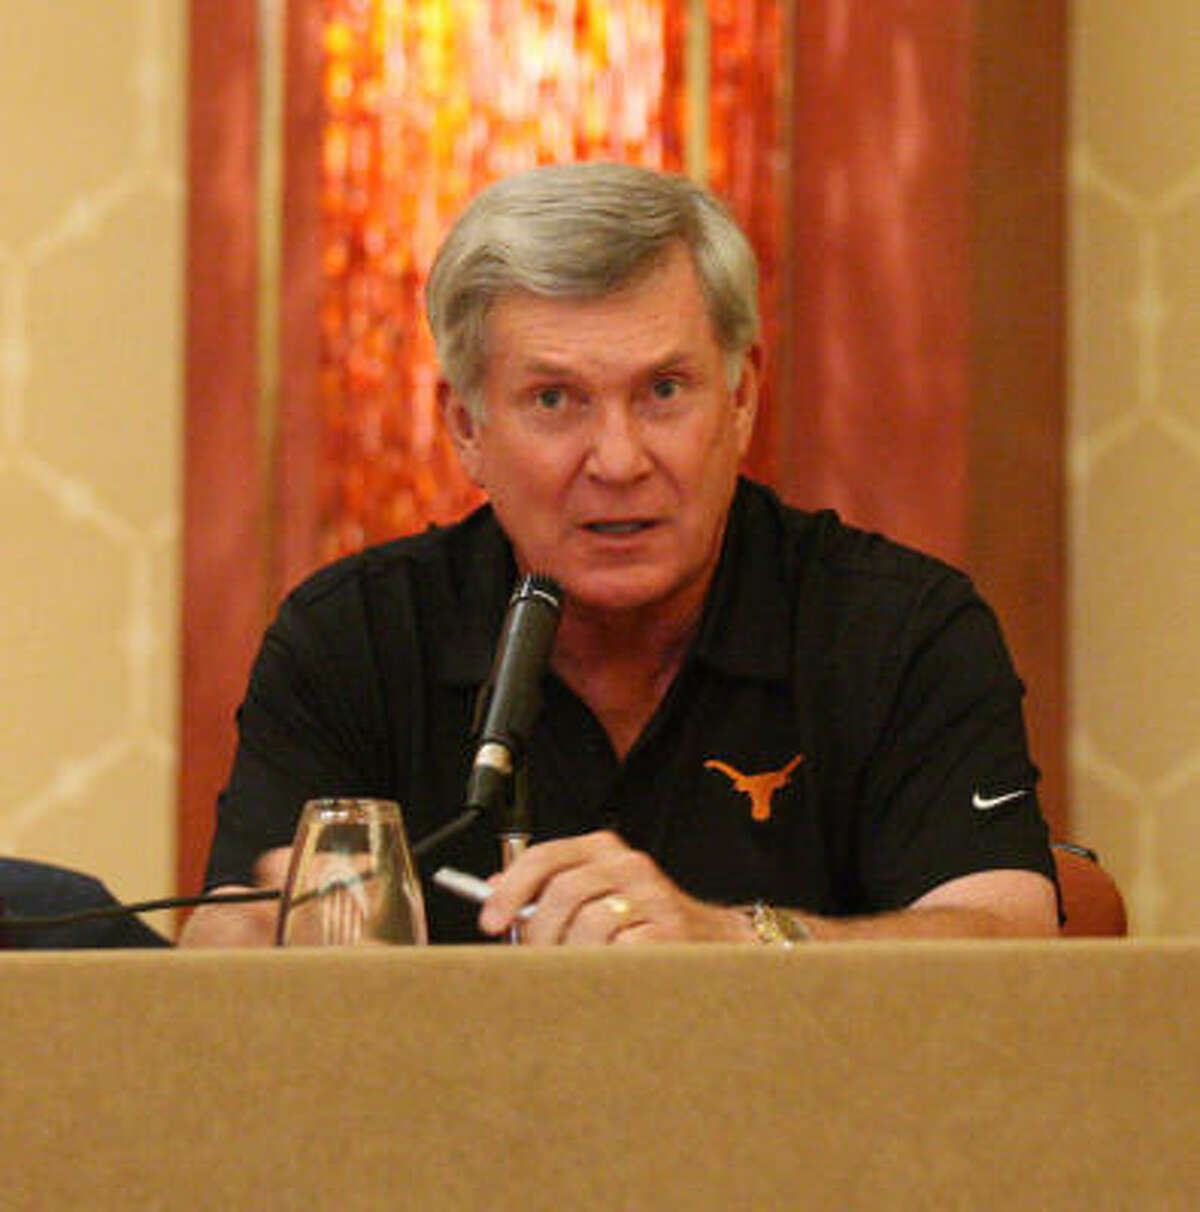 Mack Brown said 2011 will represent a “clean slate” for the Texas football program.